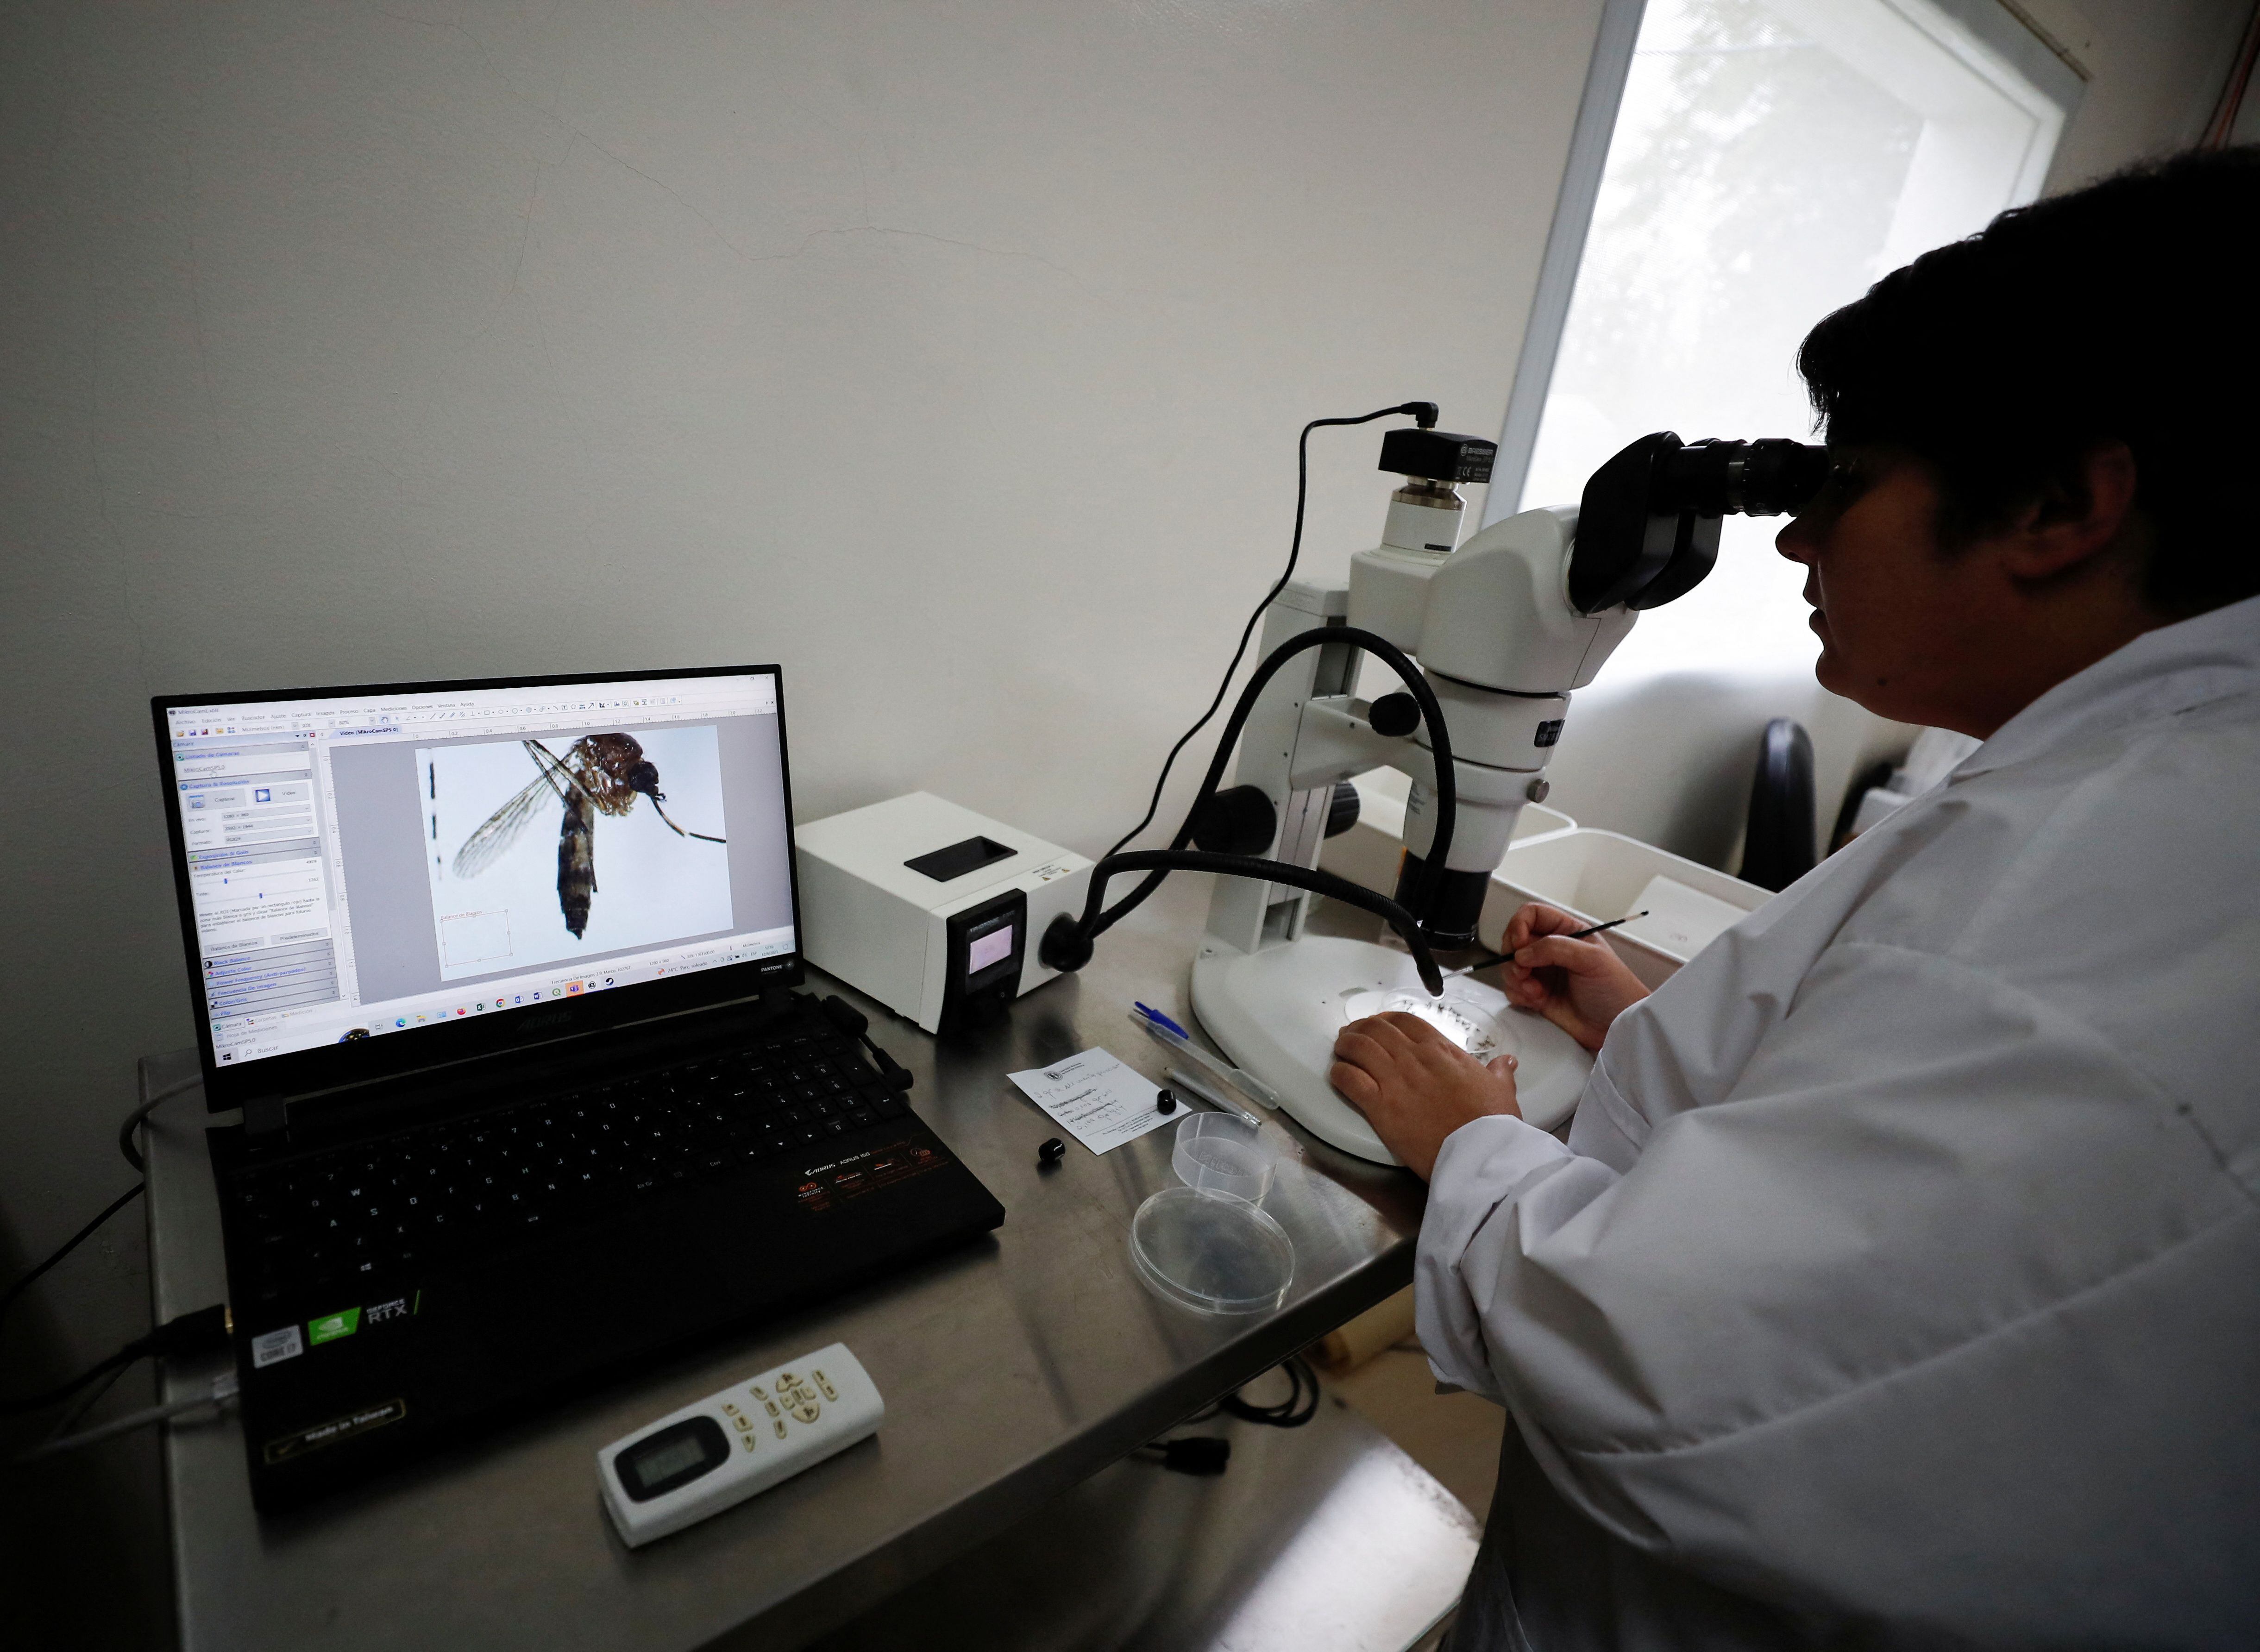 Technician Marianela Garcia Alba, 39, looks at an Aedes aegypti mosquito under a microscope at the CNEA (National Atomic Energy Commission), in Ezeiza, in the outskirts of Buenos Aires, Argentina April 12, 2023. REUTERS/Agustin Marcarian